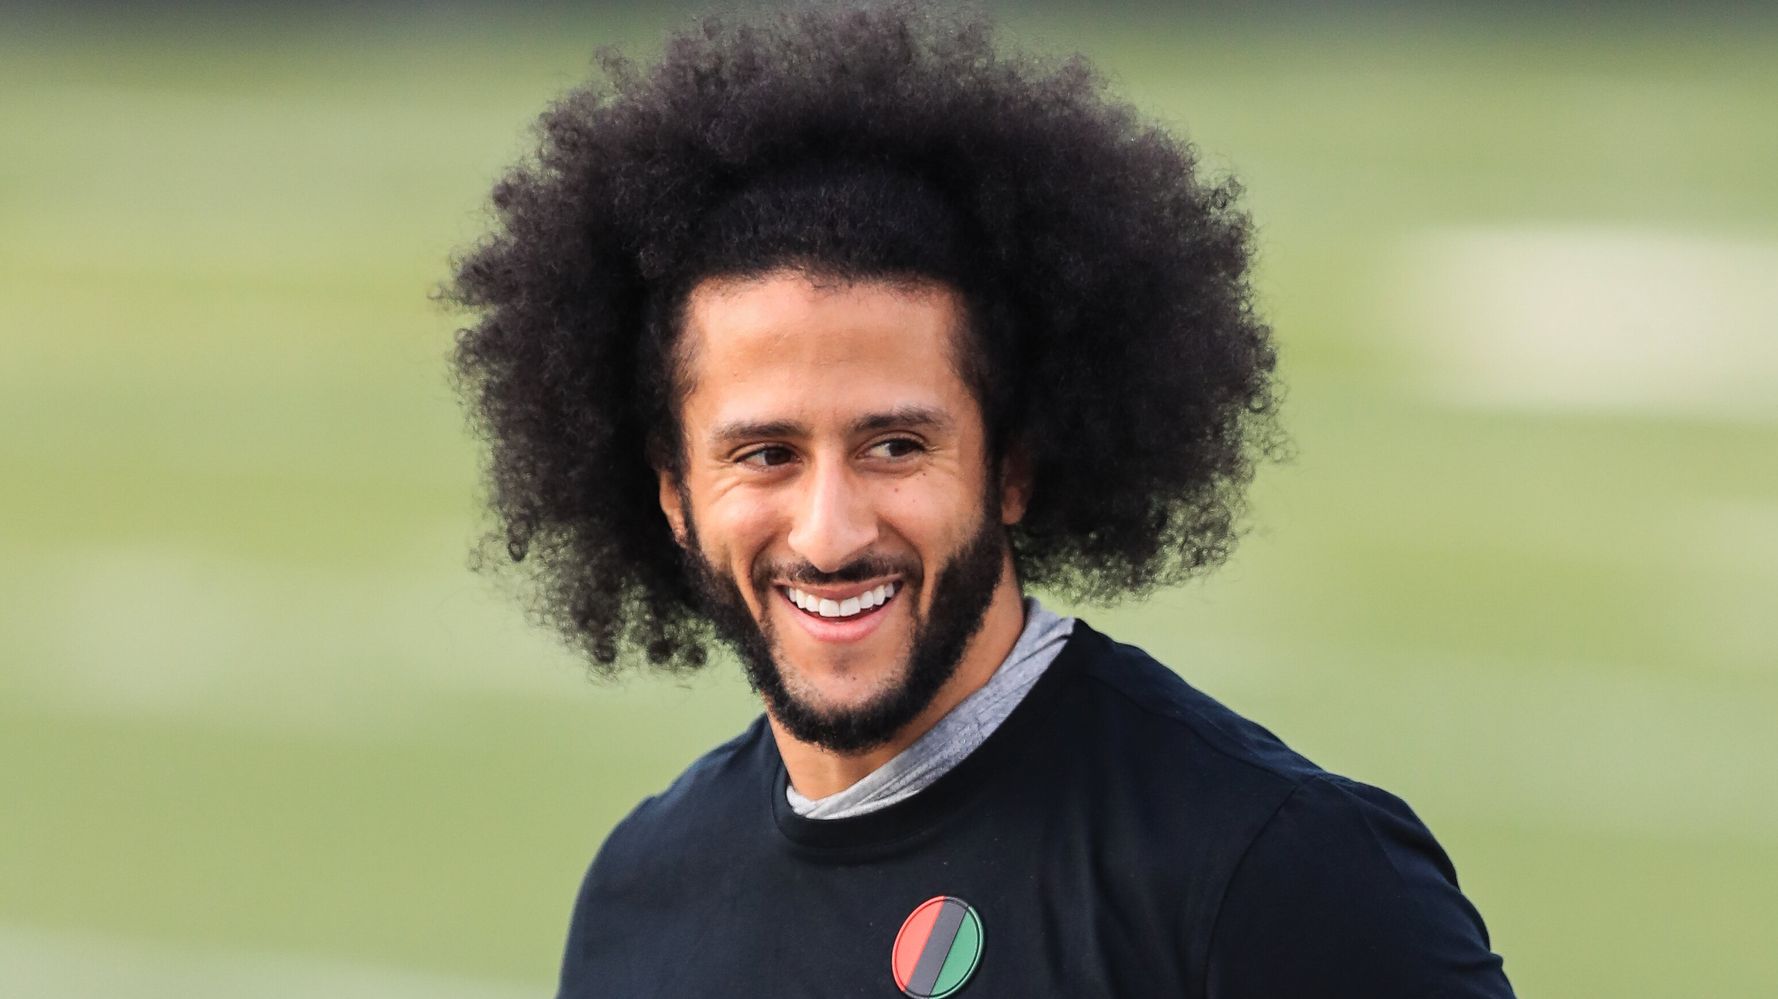 Colin Kaepernick To Release A 'Deeply Personal' Children's Book